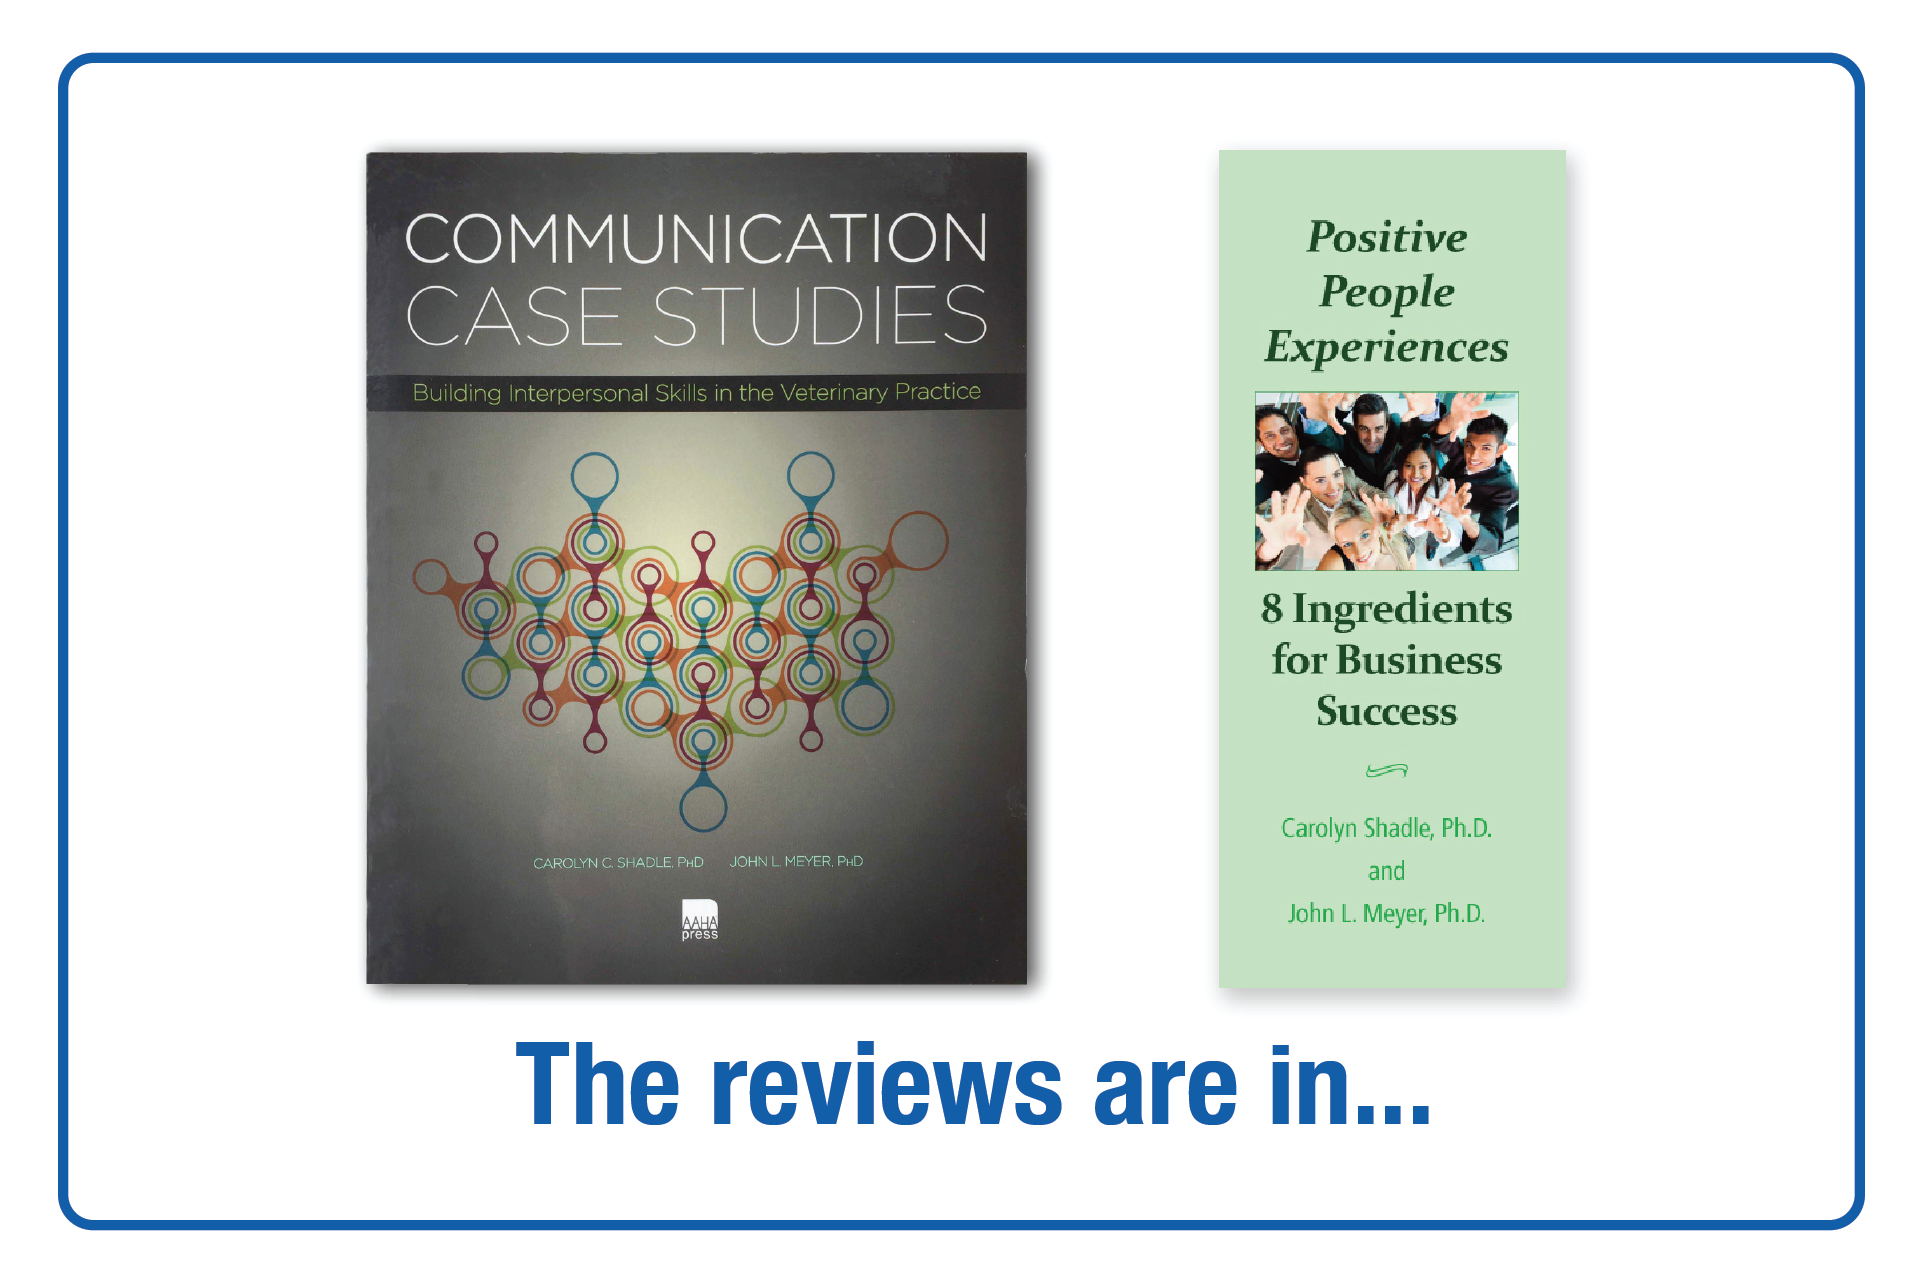 What reviewers are saying about Communications Case Studies and Positive People Experiences